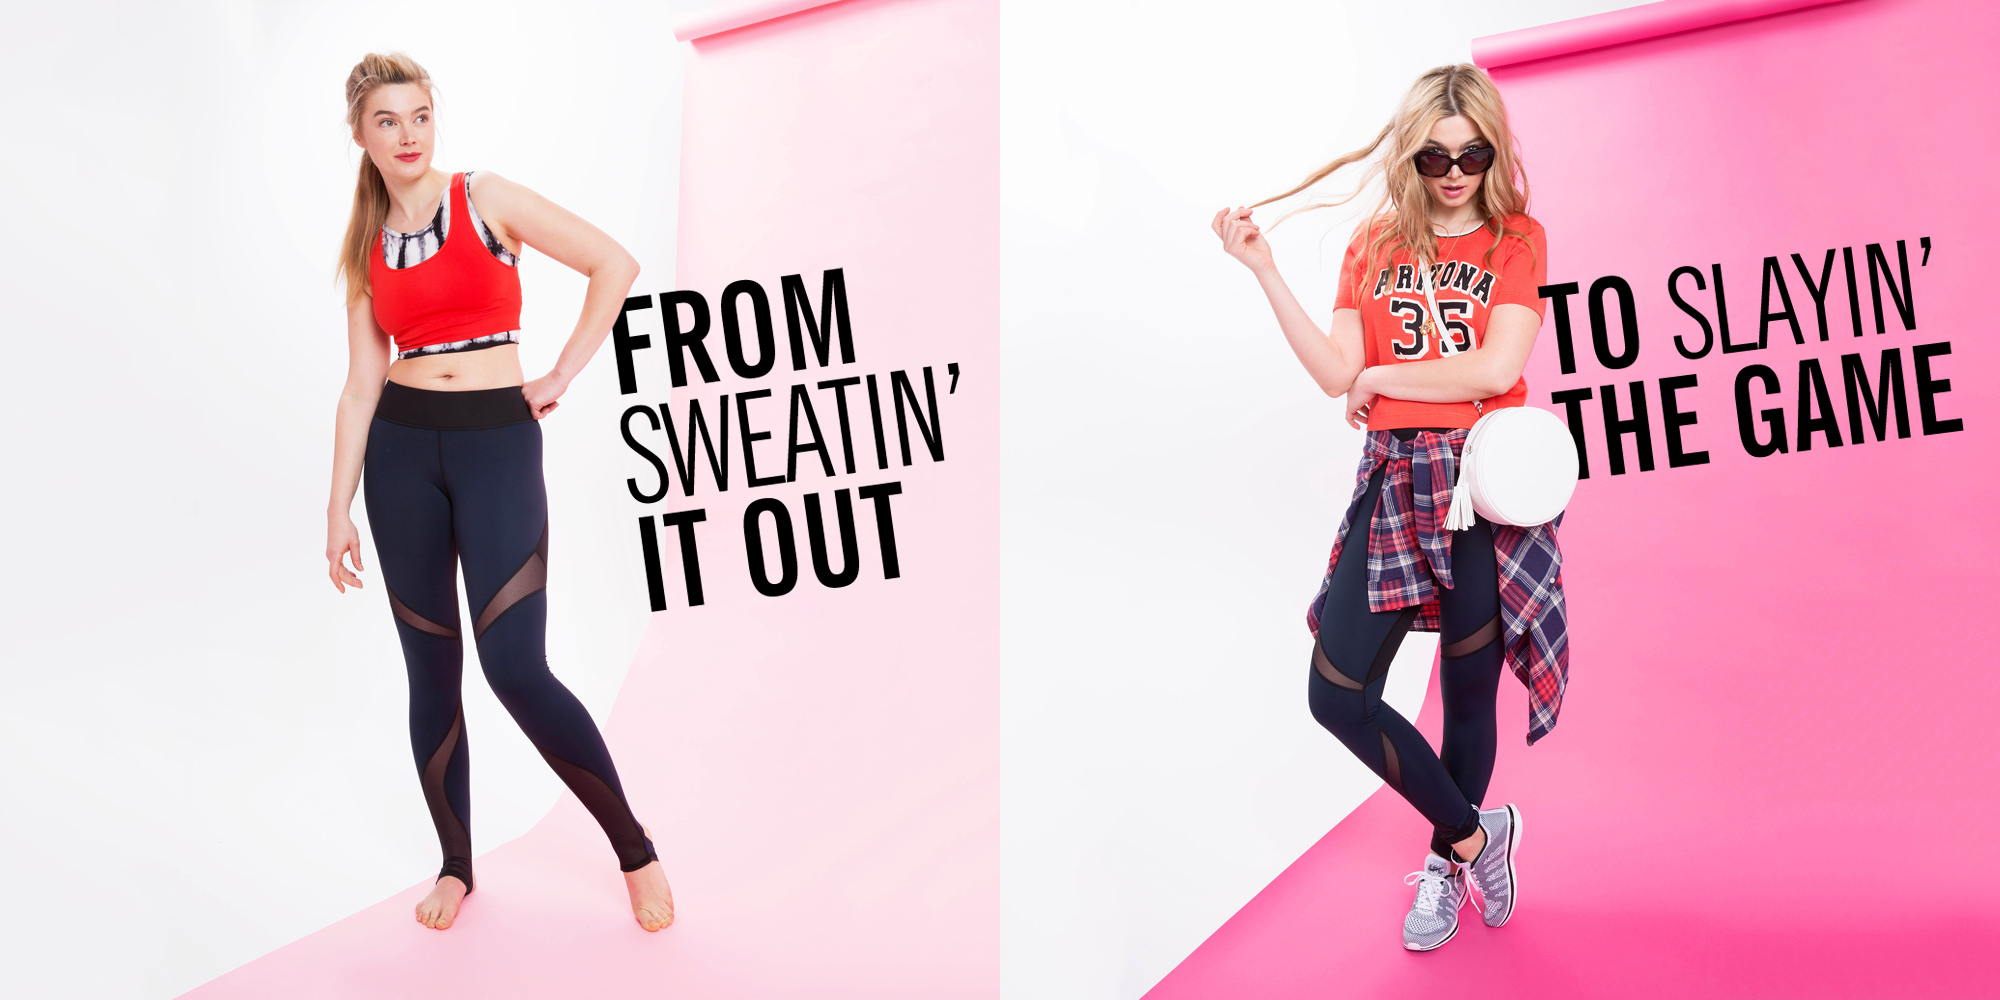 30 Pairs of Leggings You'll Totally Want to Wear Outside the Gym